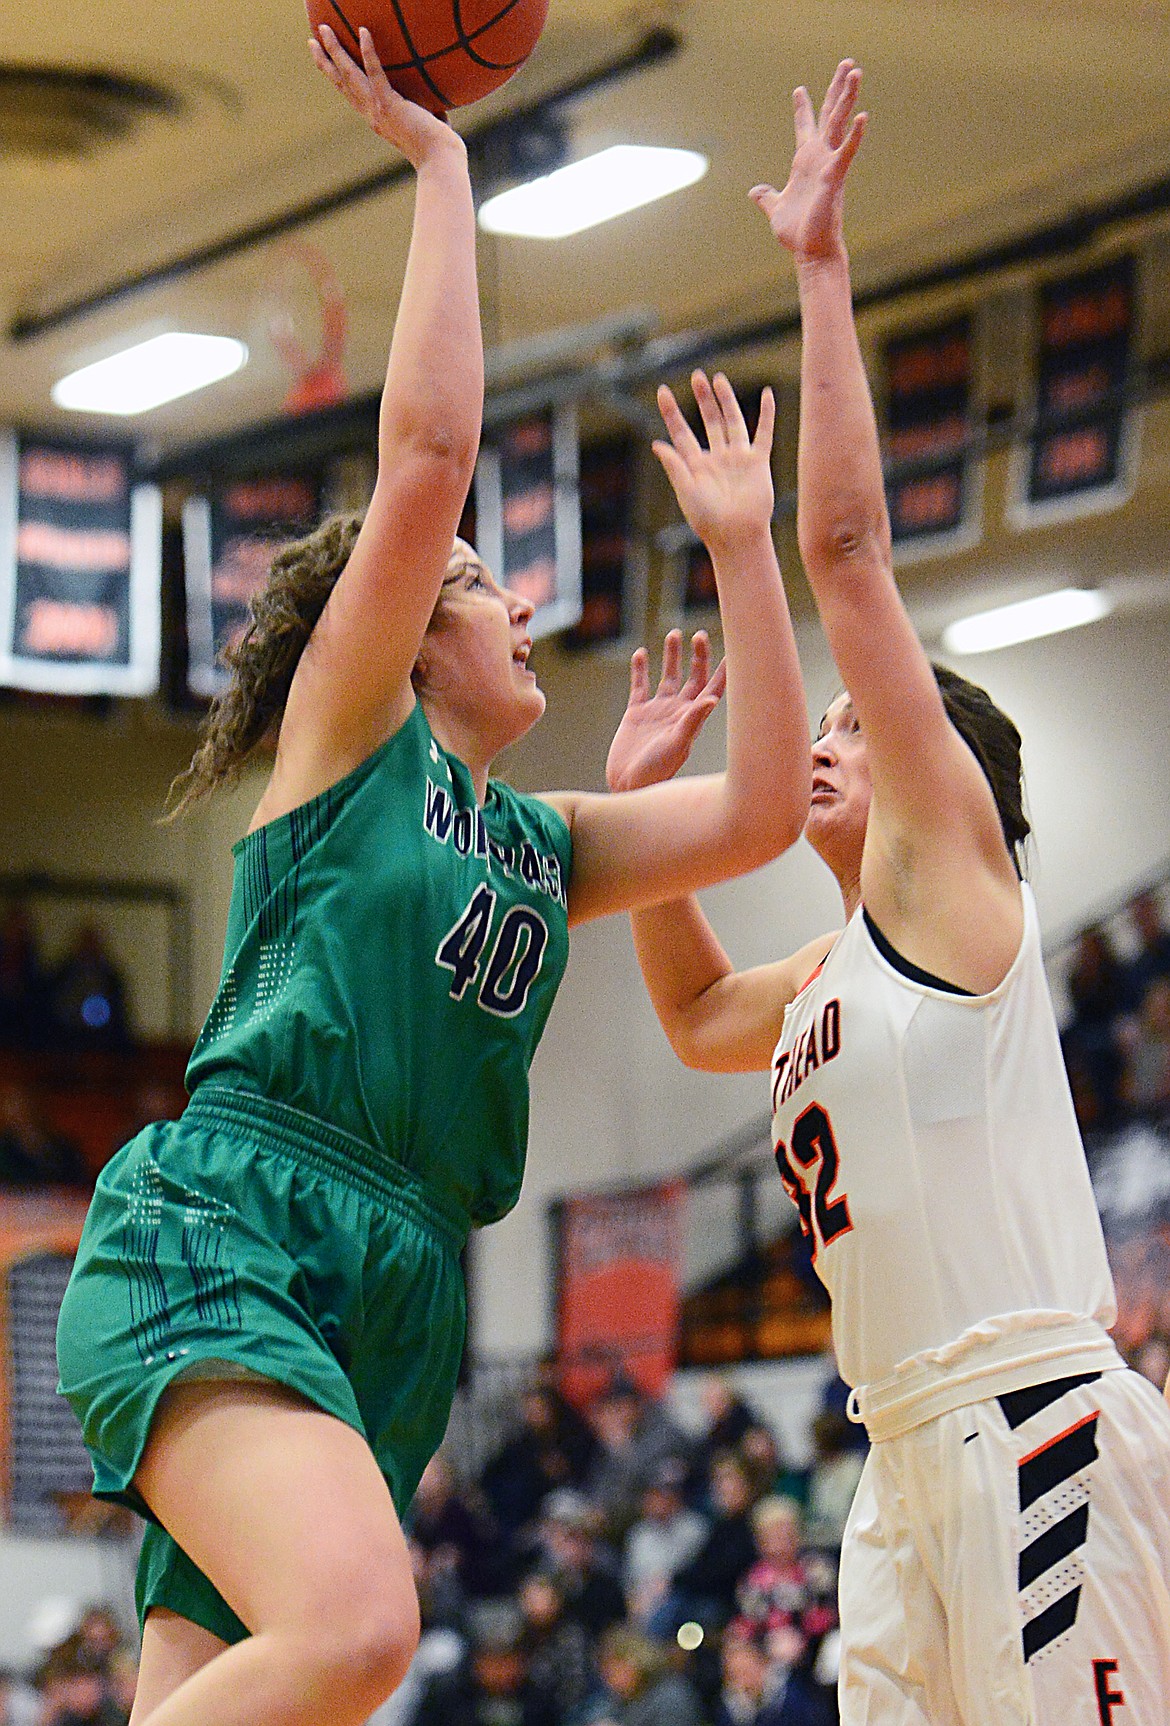 Glacier's Raley Shirey (40) goes to the hoop against Flathead's Taylor Henley (32) during a crosstown matchup at Flathead High School on Tuesday. (Casey Kreider/Daily Inter Lake)